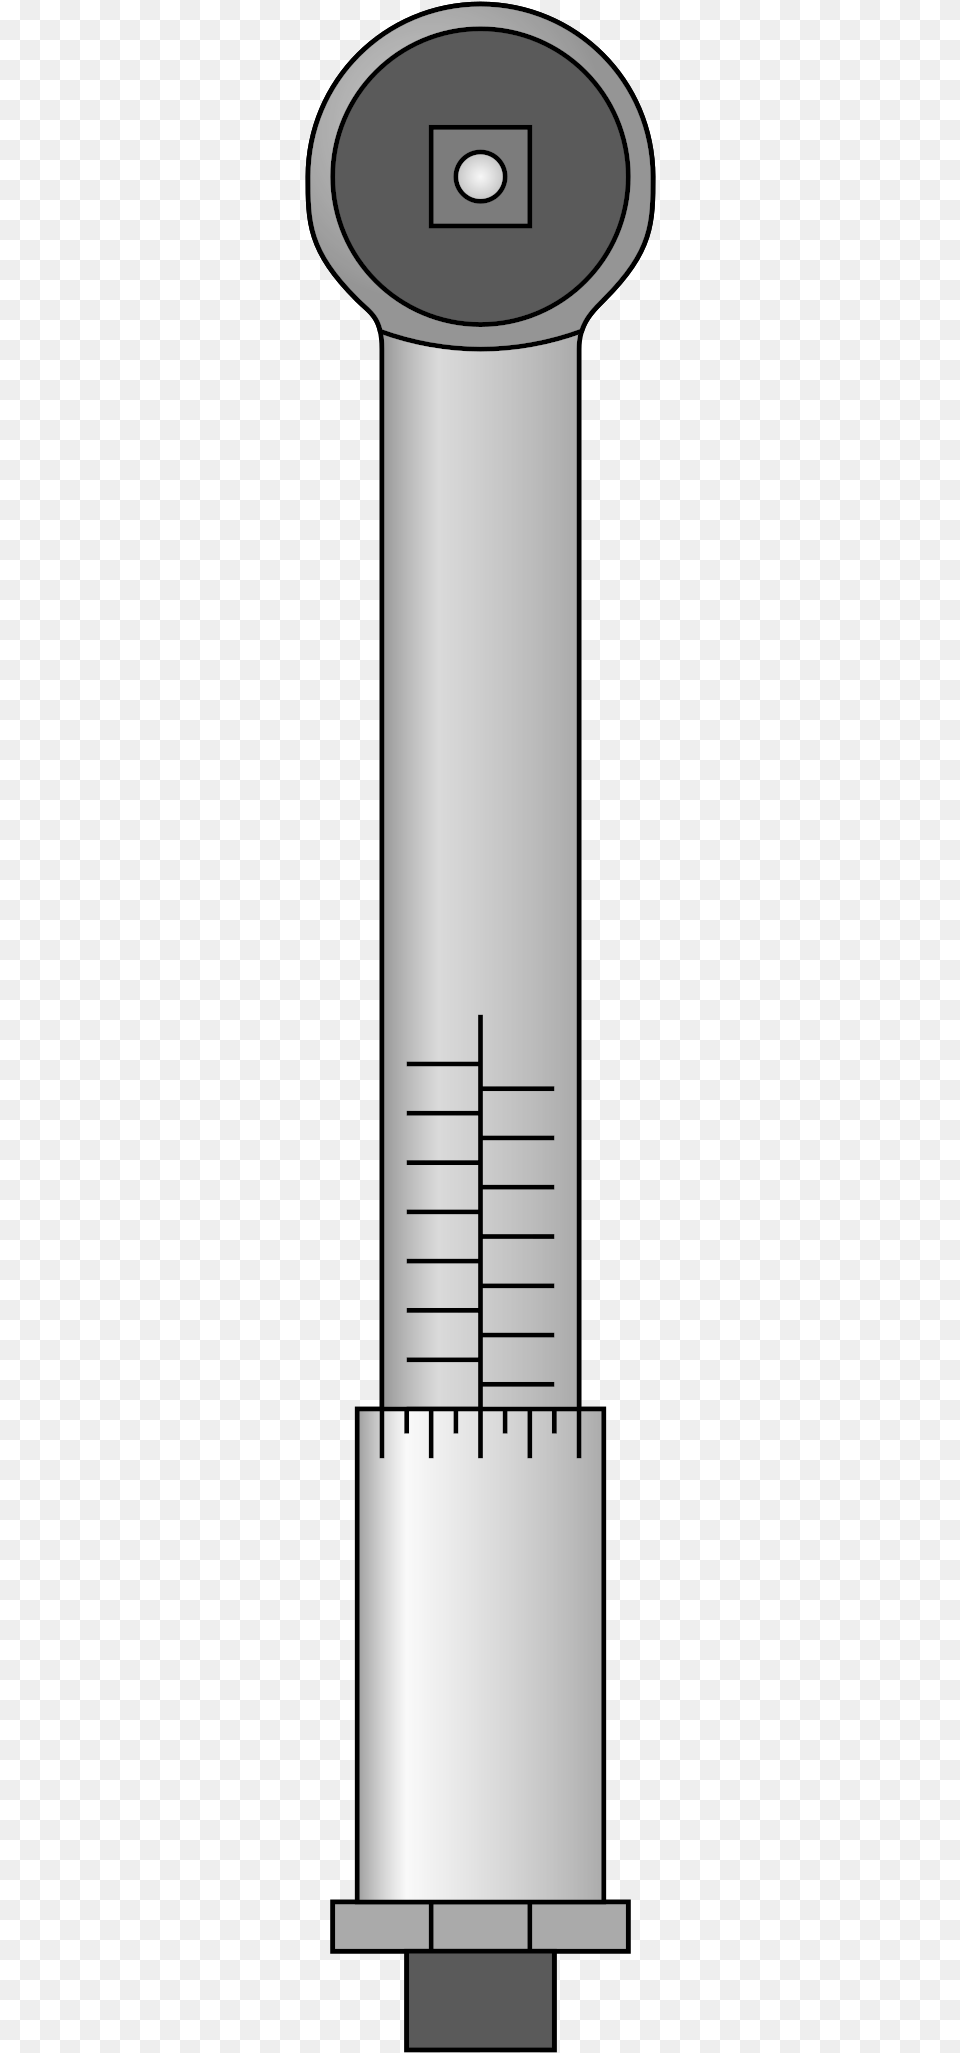 This Icons Design Of Torque Wrench Png Image